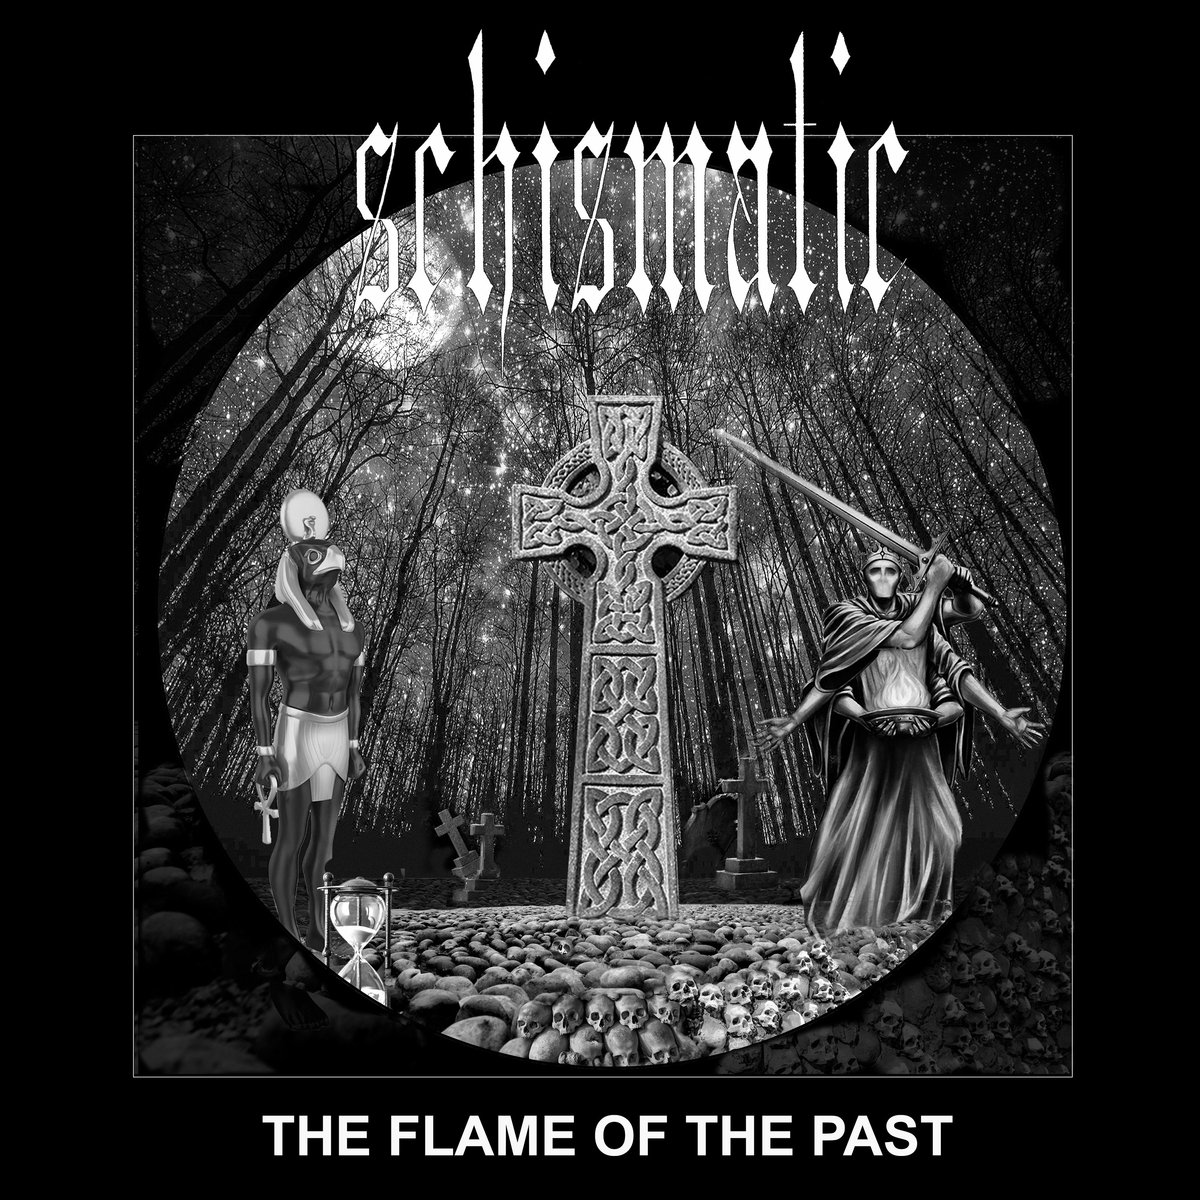 Schismatic-The Flame Of The Past-(MYSTCD 439)-CD-FLAC-2022-WRE Download